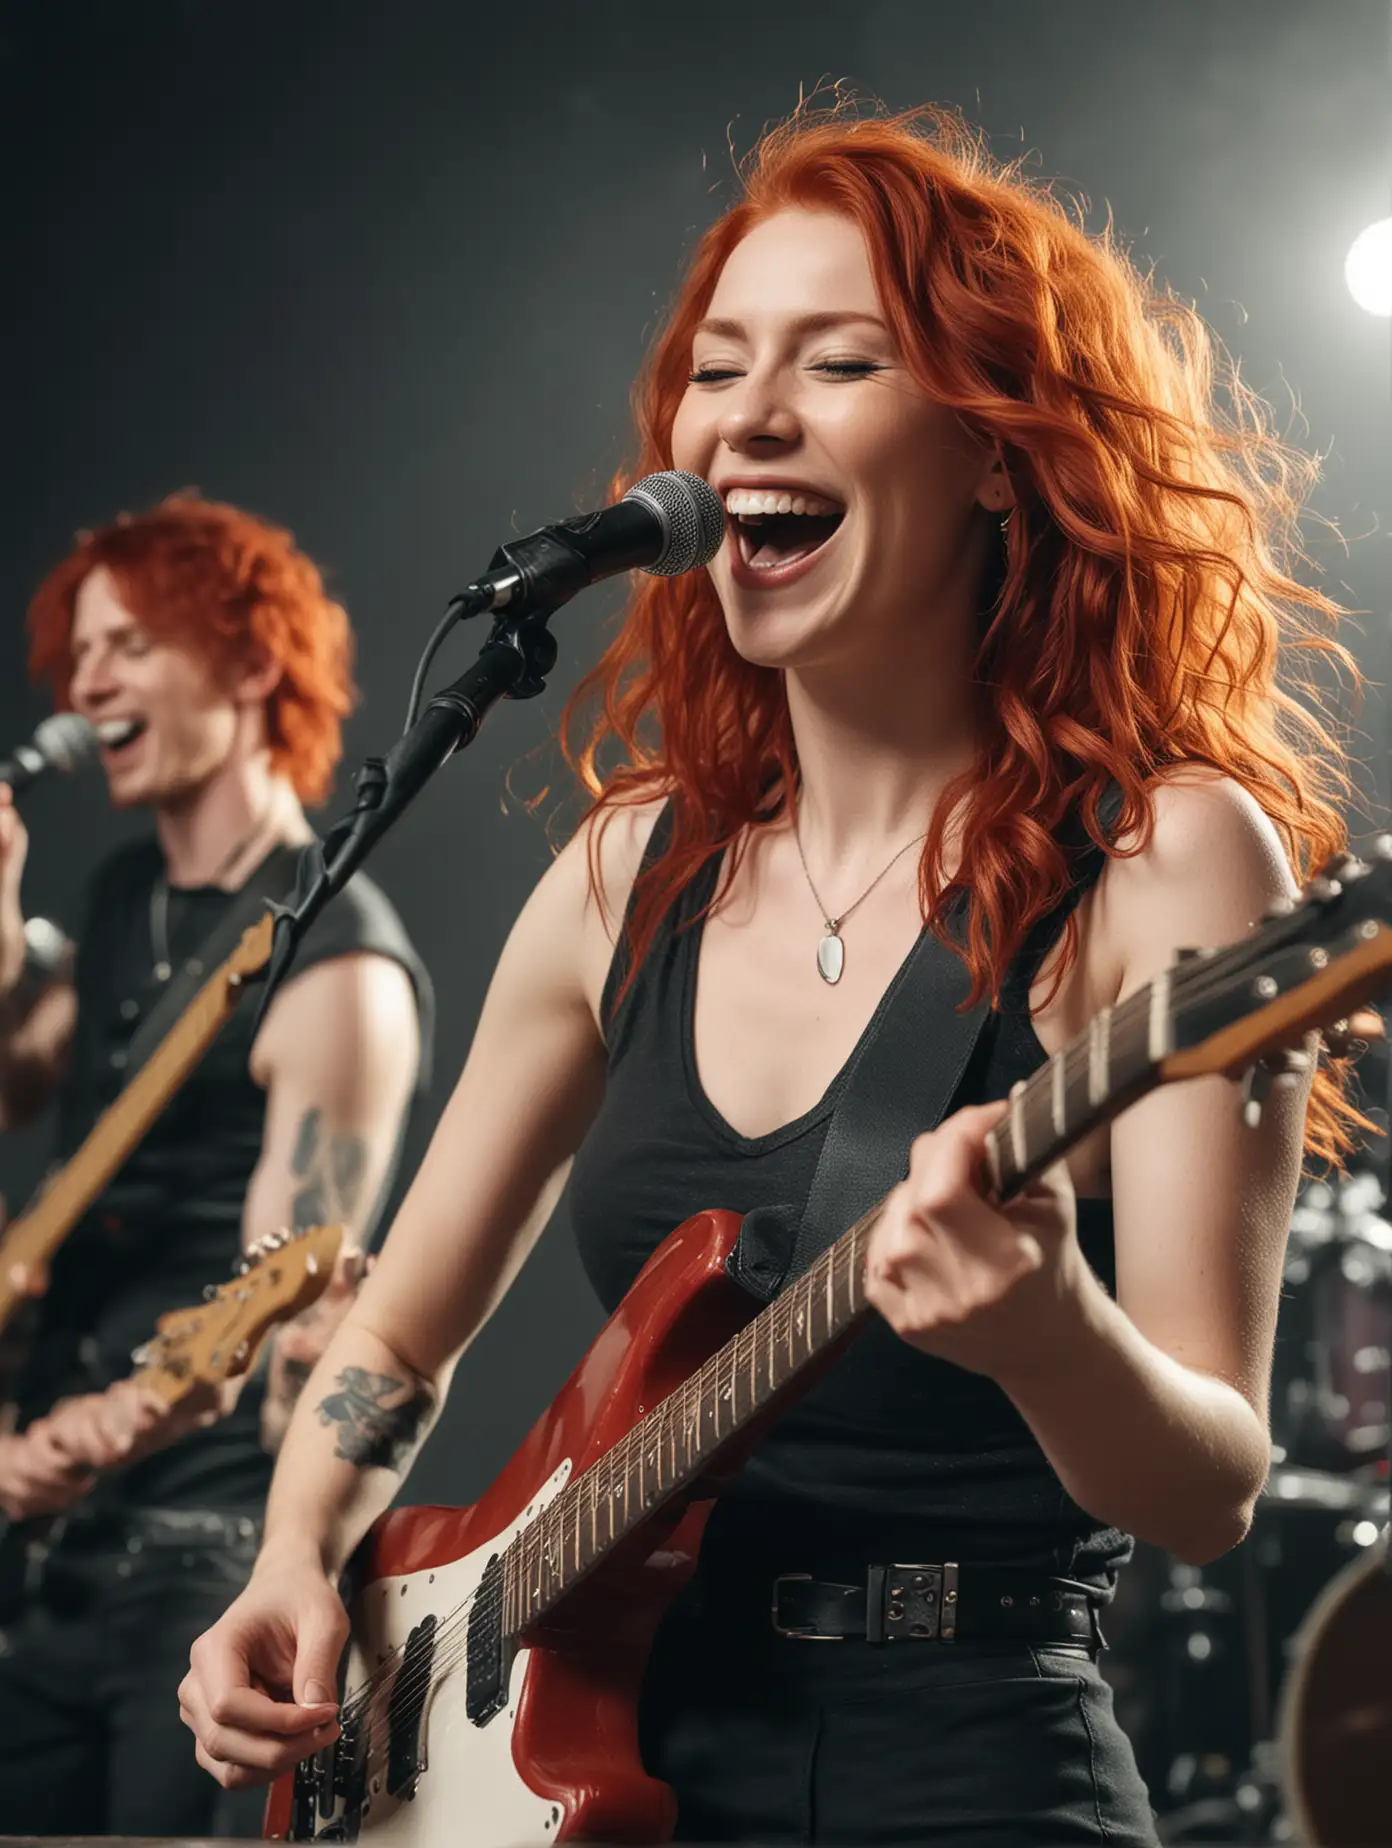 Rock band men playing an instrument, a red haired woman singer playing a guitar smiling